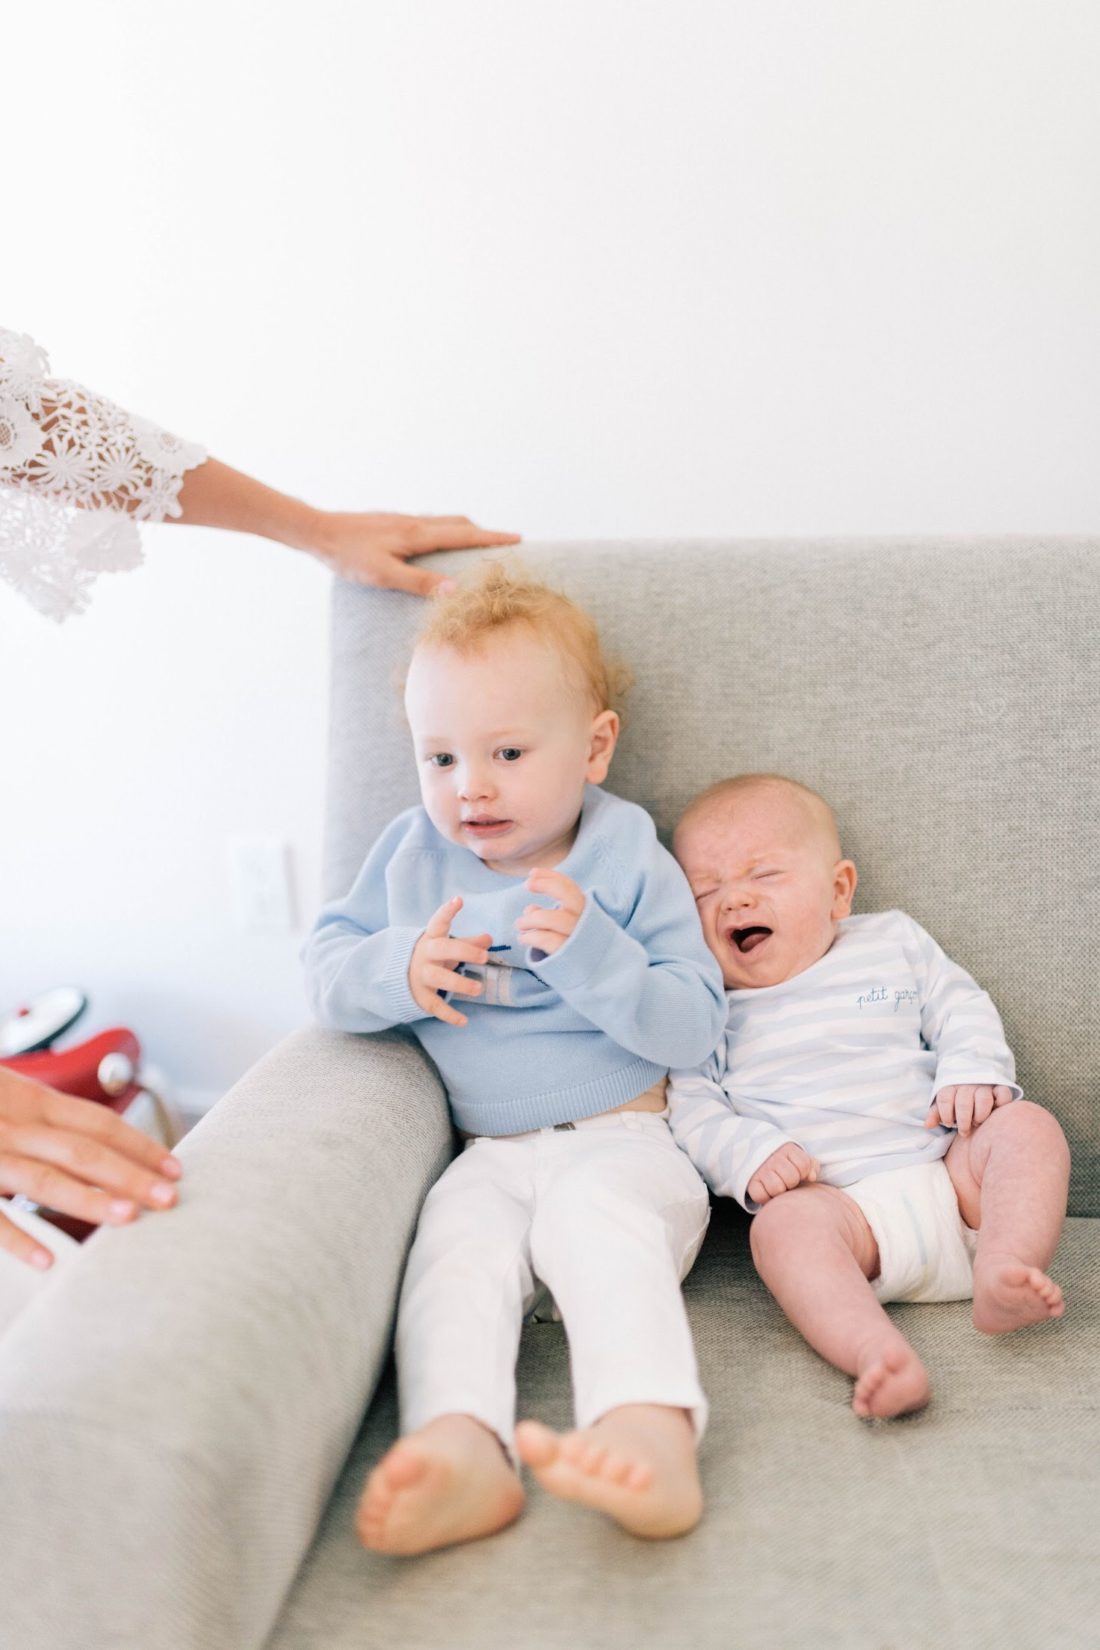 Blogger Liz Ariola "Mrs. Nipple" and her two sons Charlie and Ford